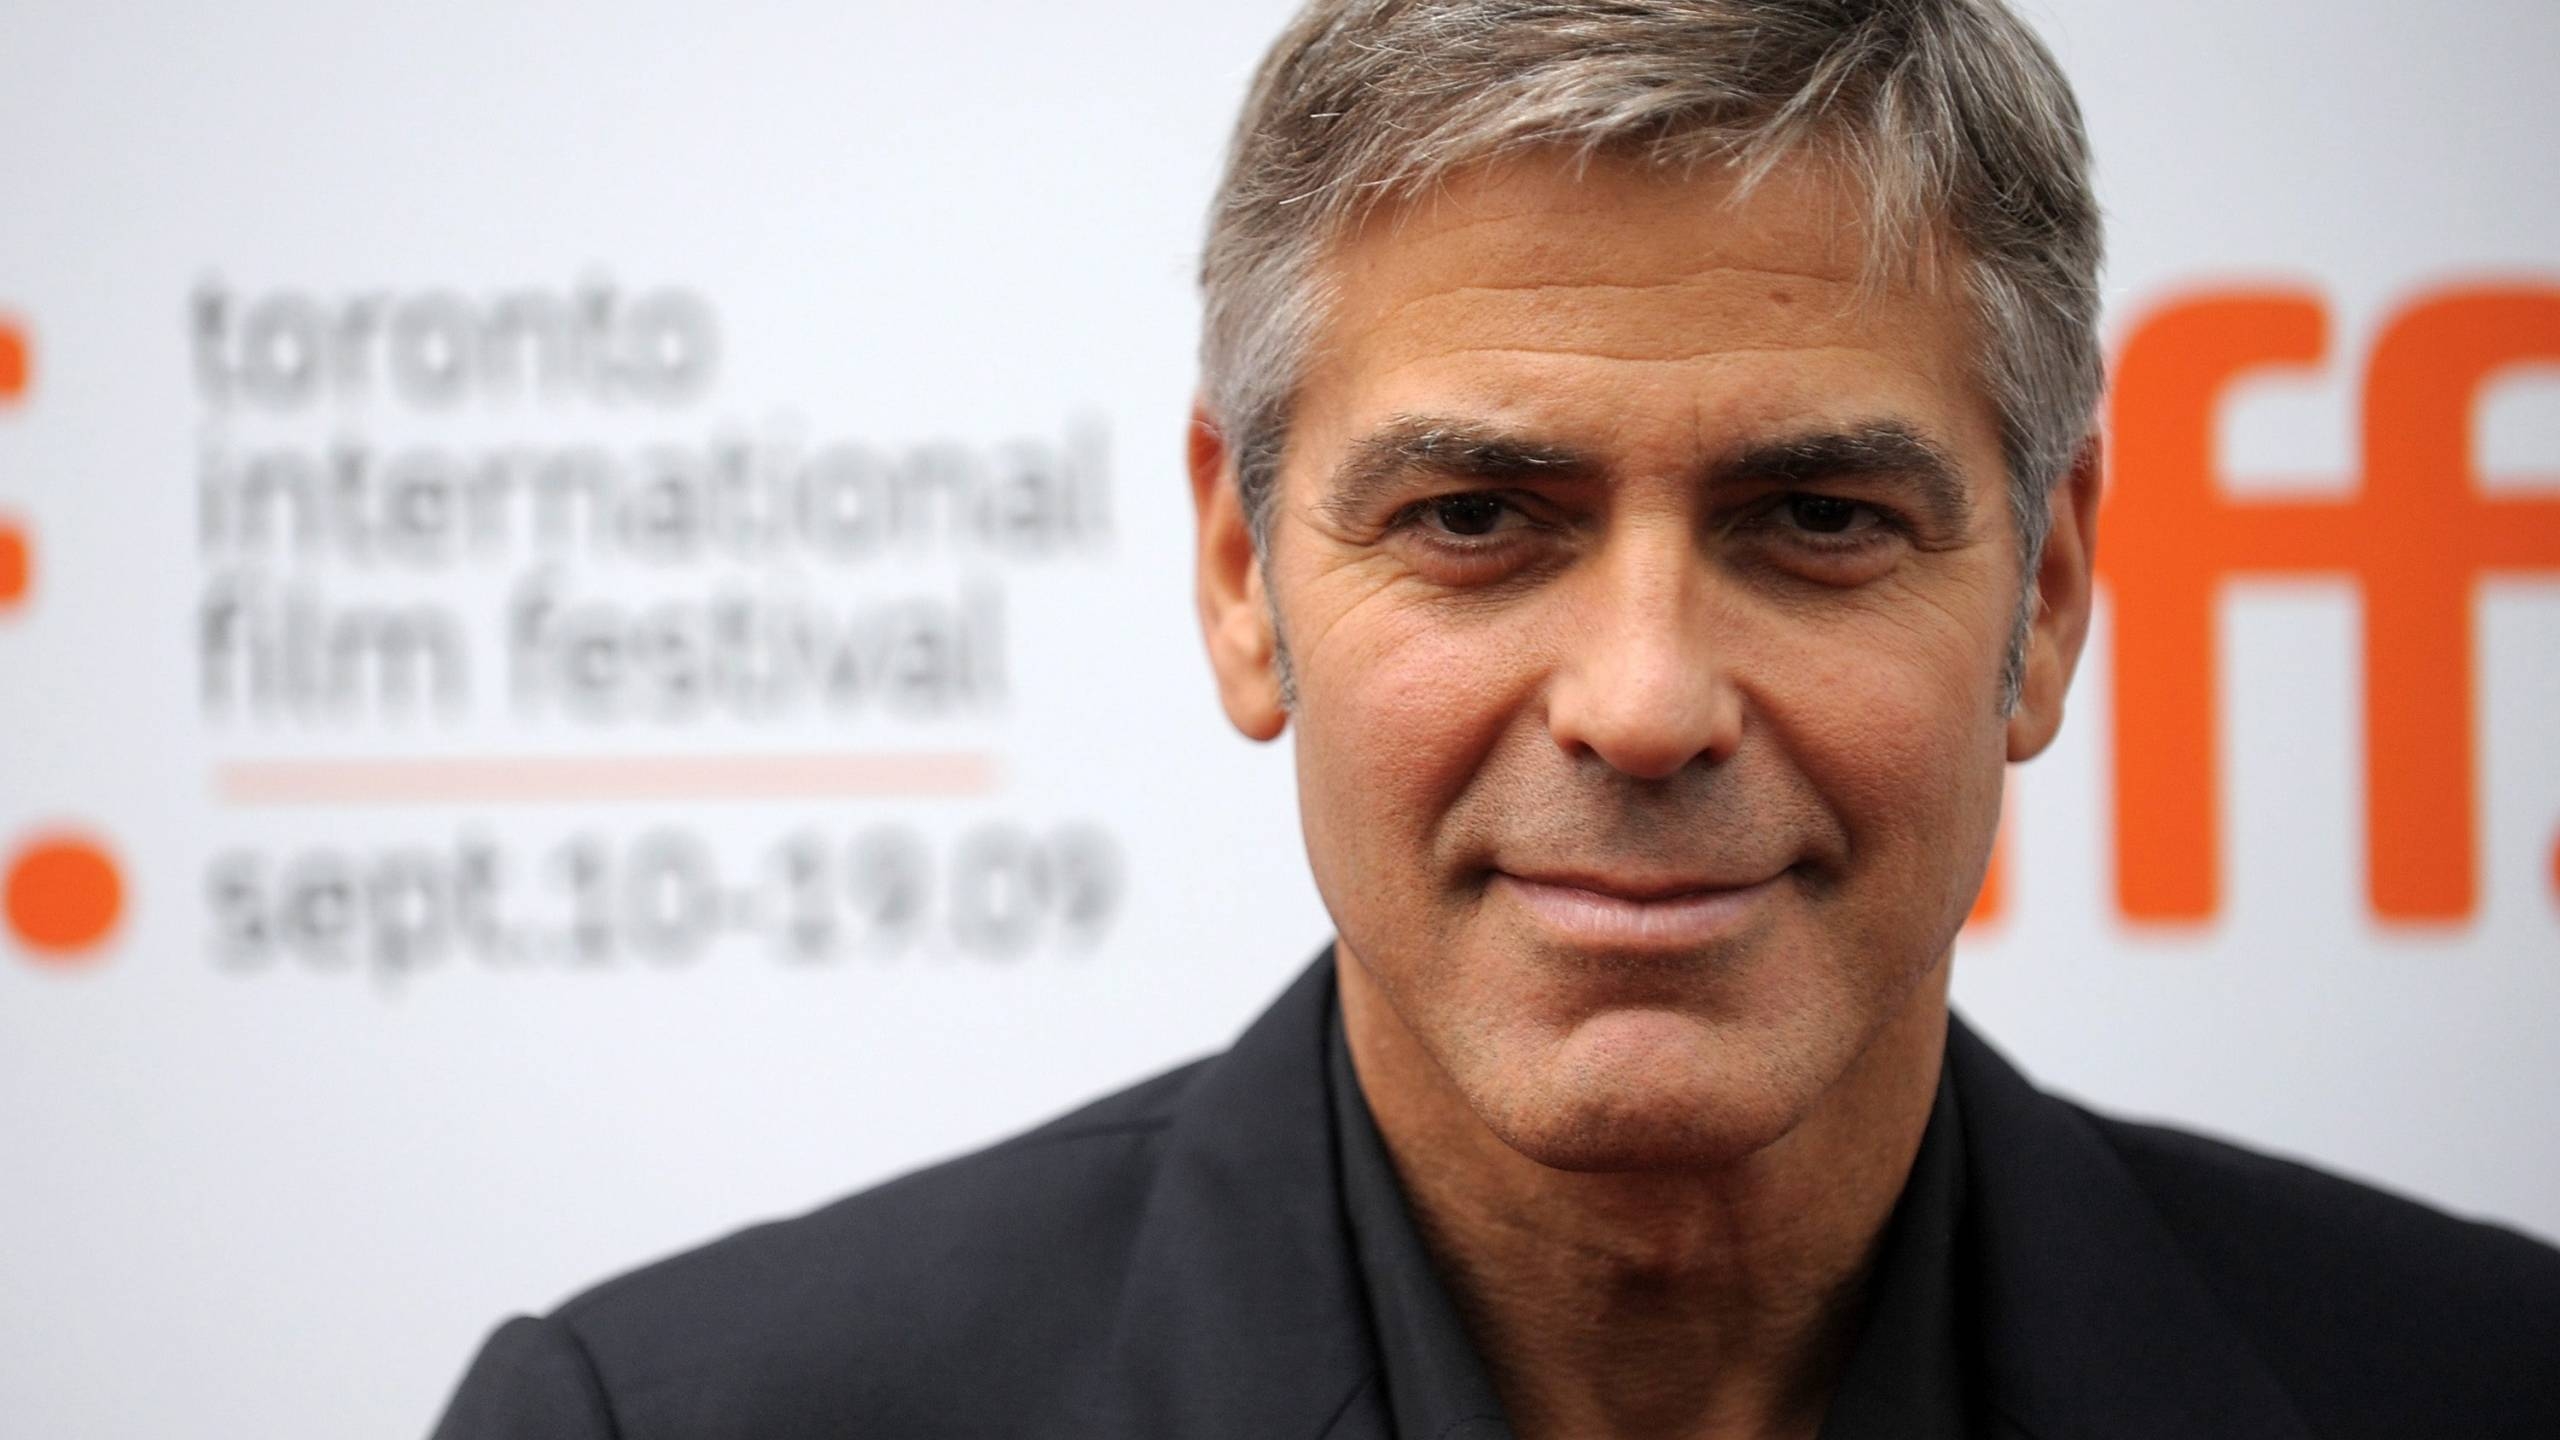 George Clooney Smile for 2560x1440 HDTV resolution